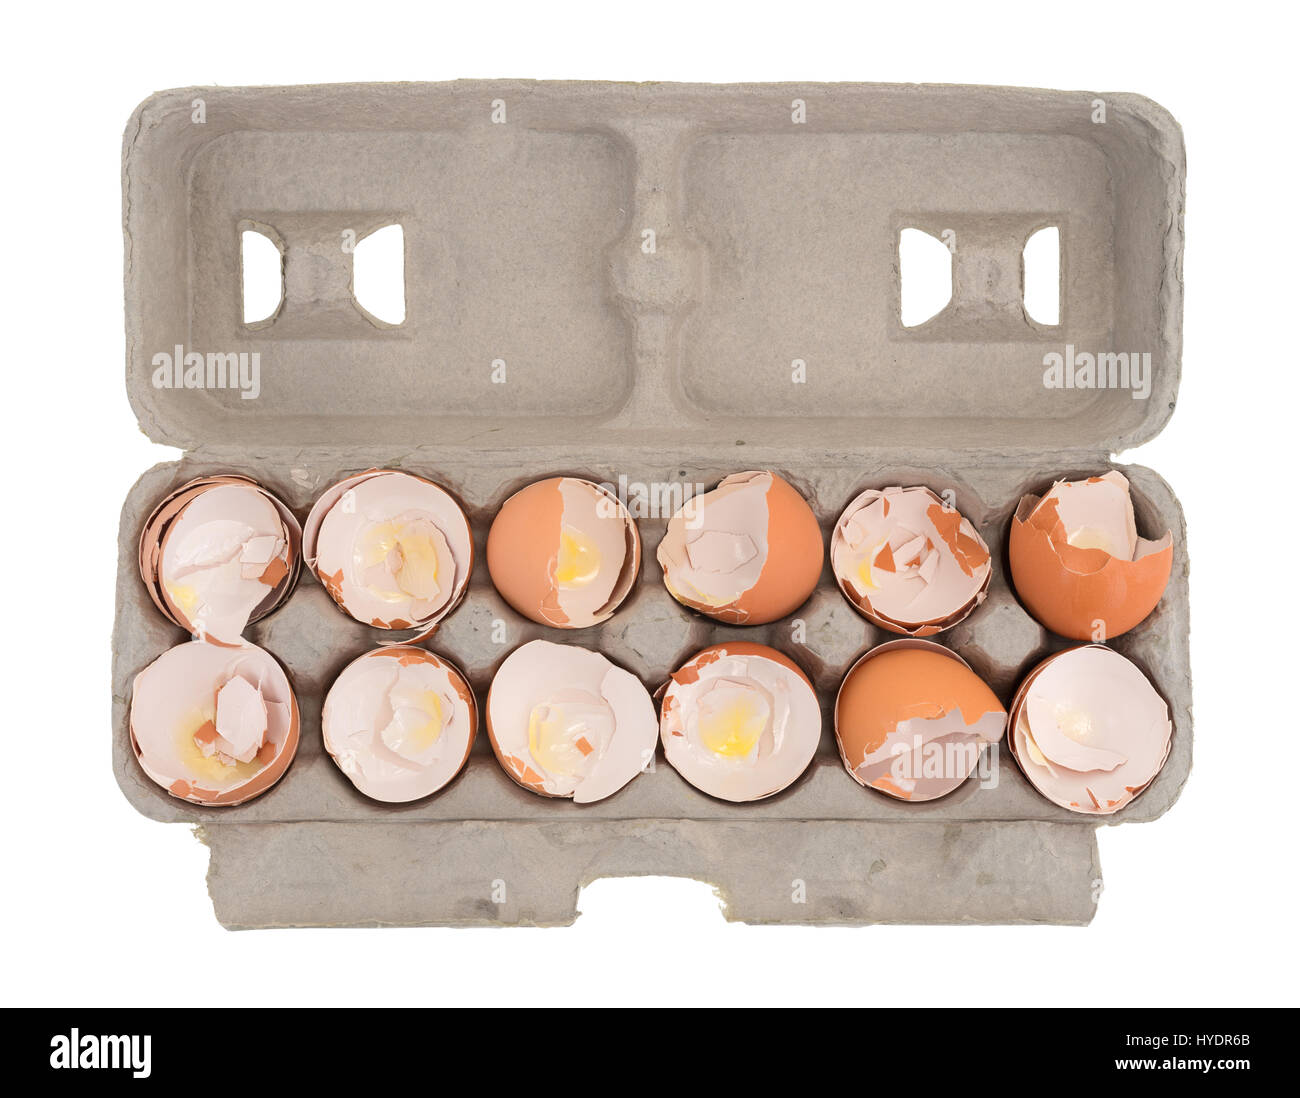 Top view of a dozen used egg shells in a cardboard container isolated on a white background. Stock Photo